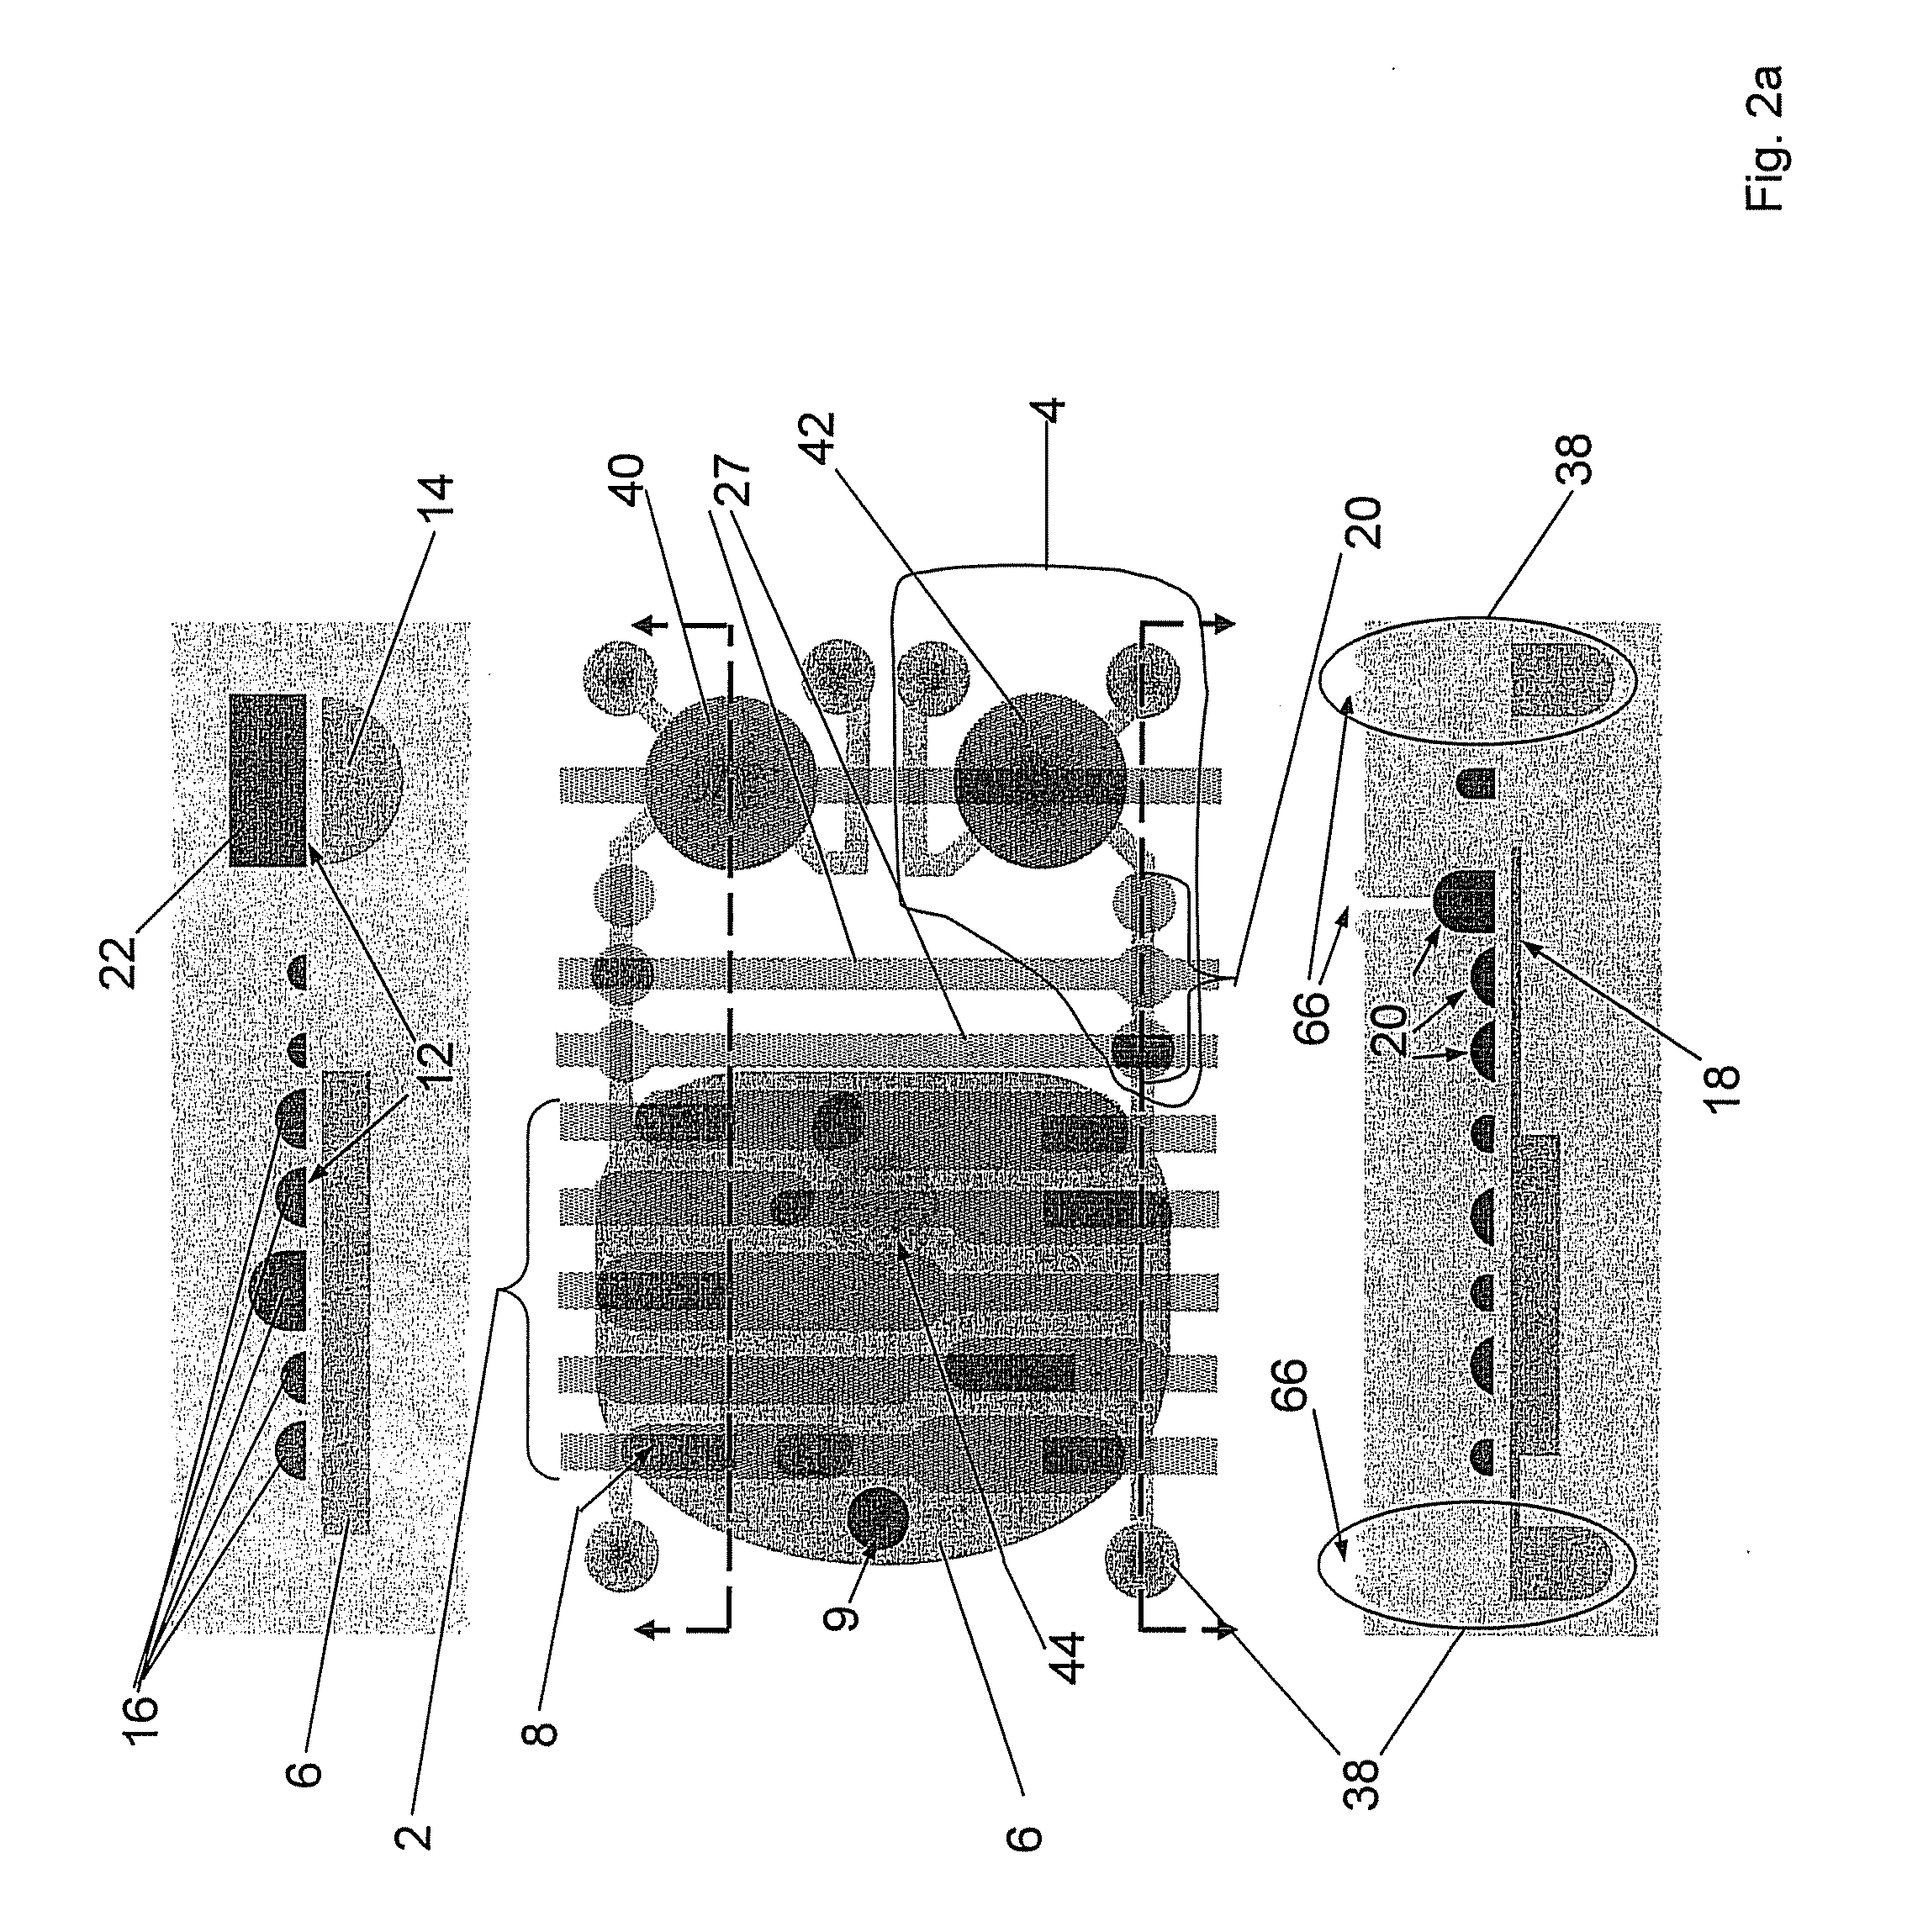 Parallel integrated bioreactor device and method